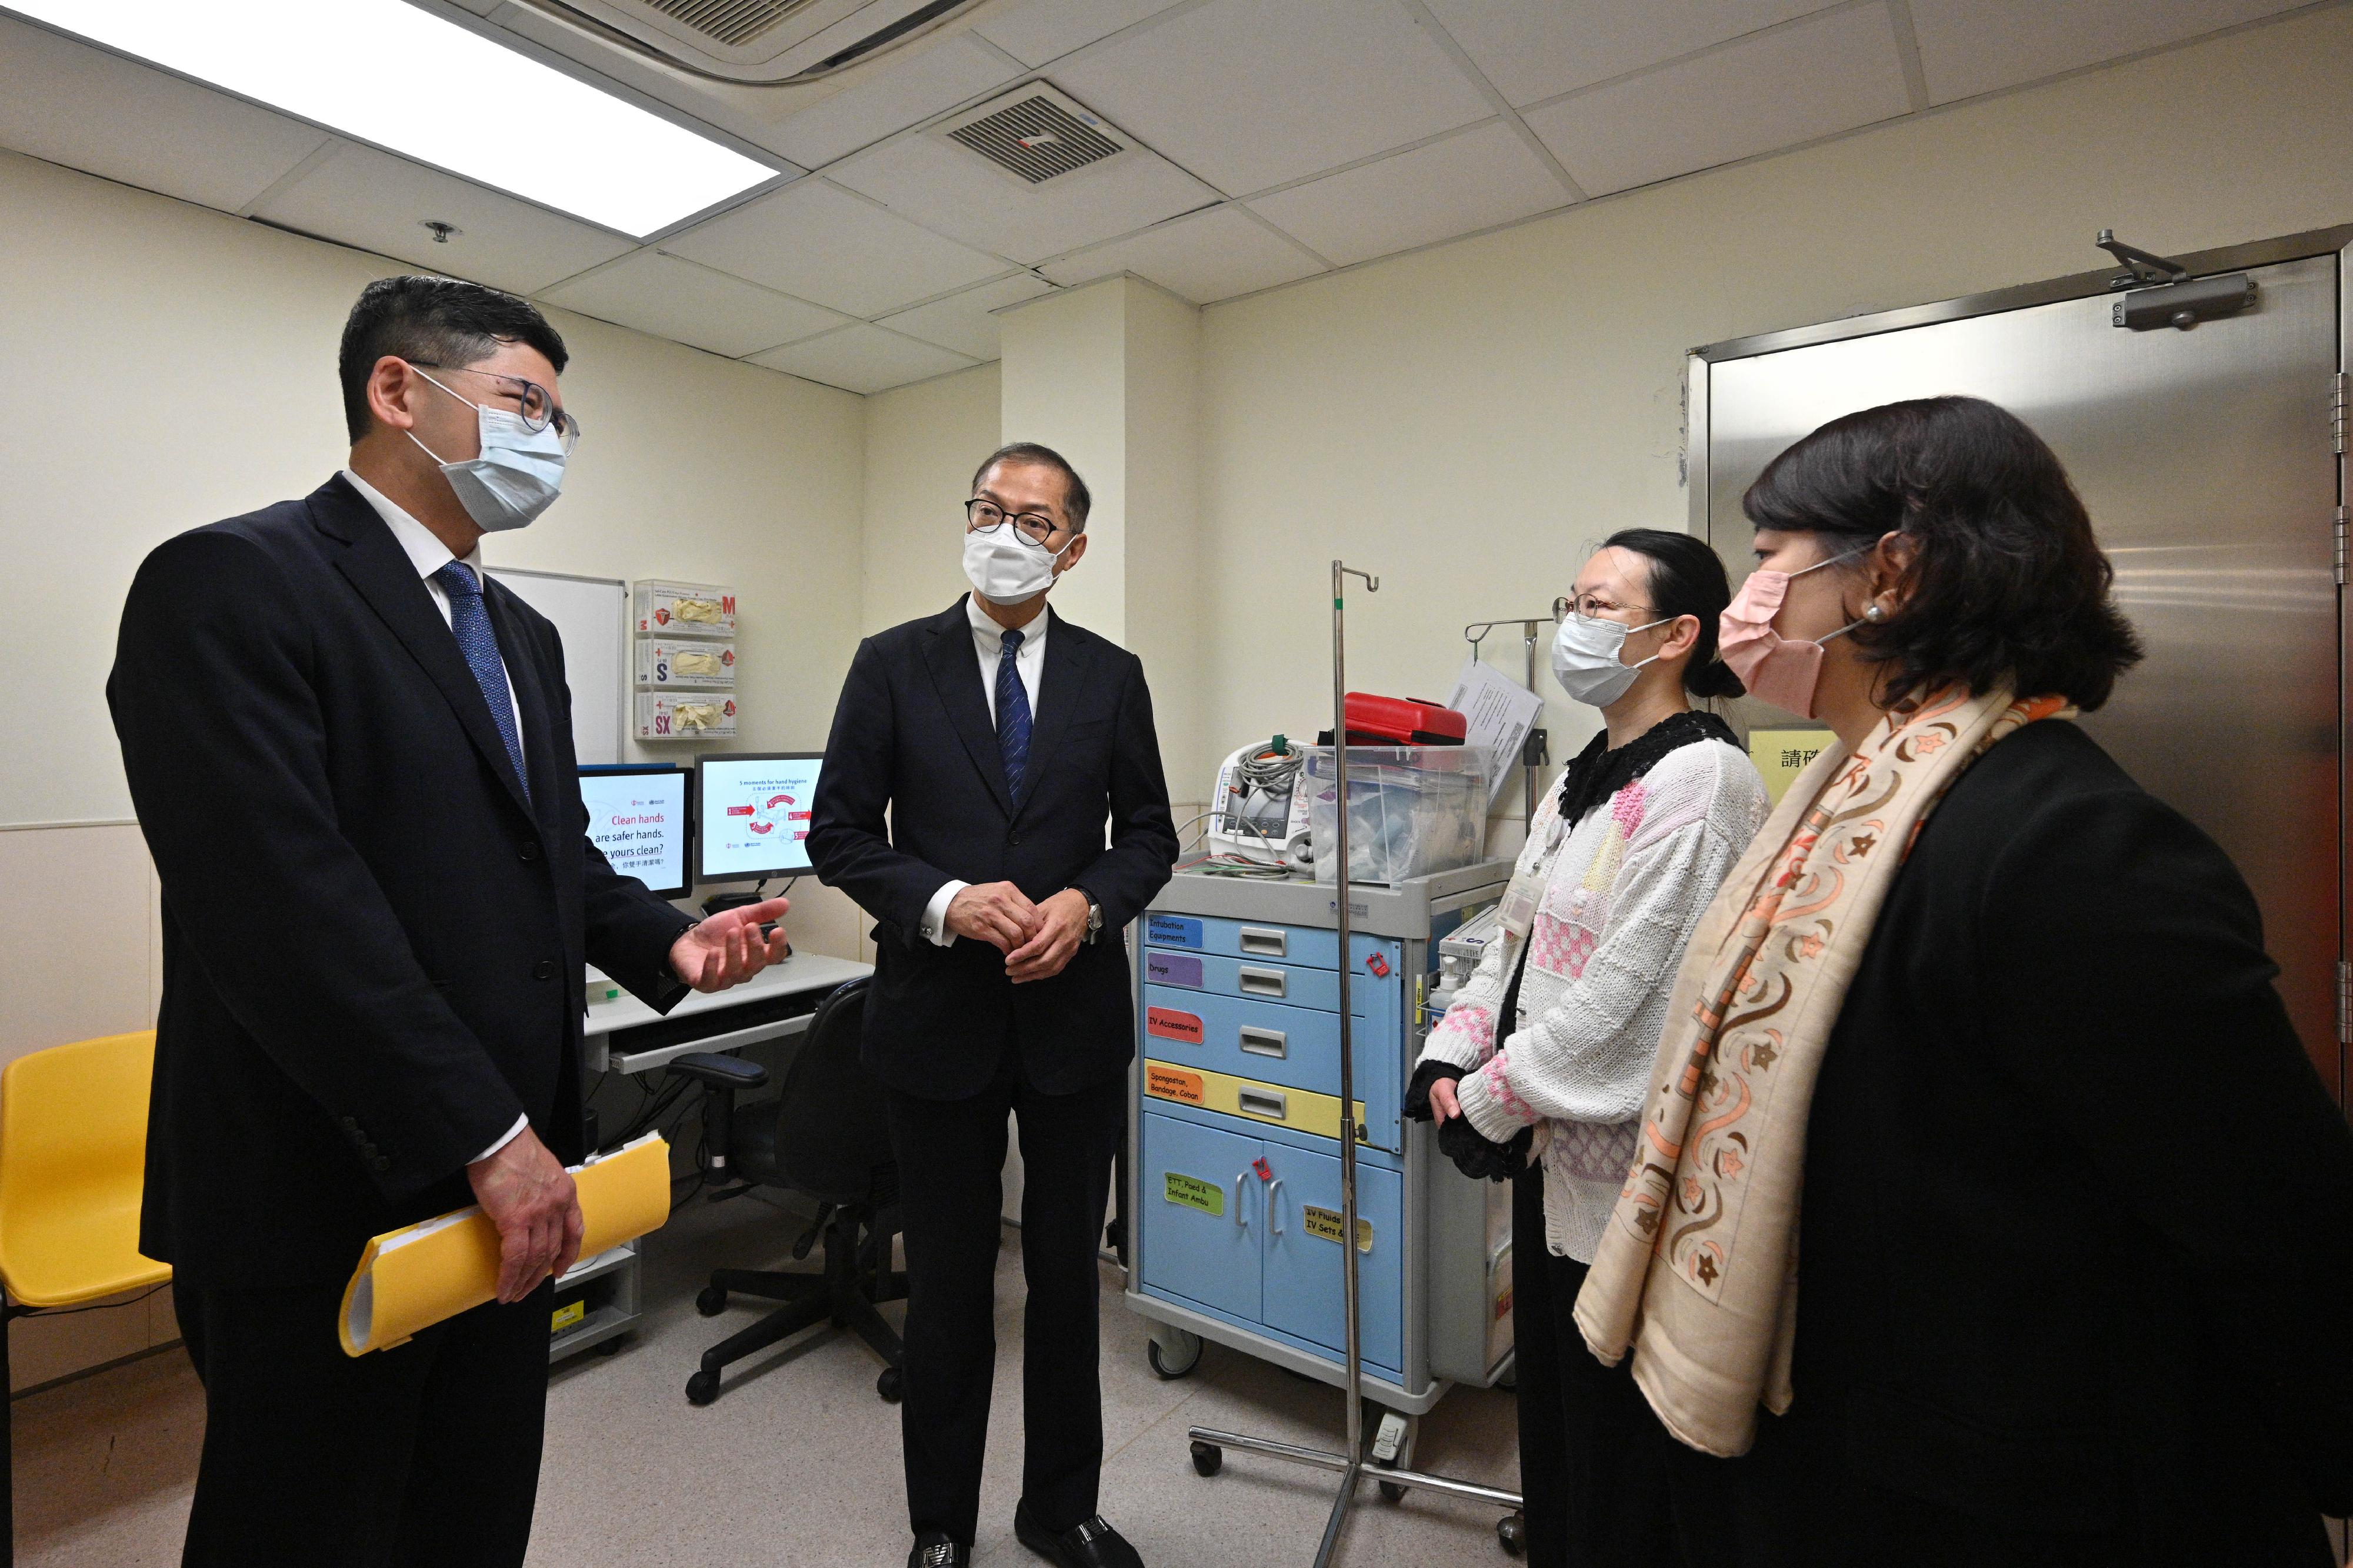 Accompanied by the Chief Executive of the Hospital Authority, Dr Tony Ko (first left), the Secretary for Health, Professor Lo Chung-mau (second left), and the Under Secretary for Health, Dr Libby Lee (first right), interact with healthcare personnel at Robert Black General Out-patient Clinic this morning (February 6).